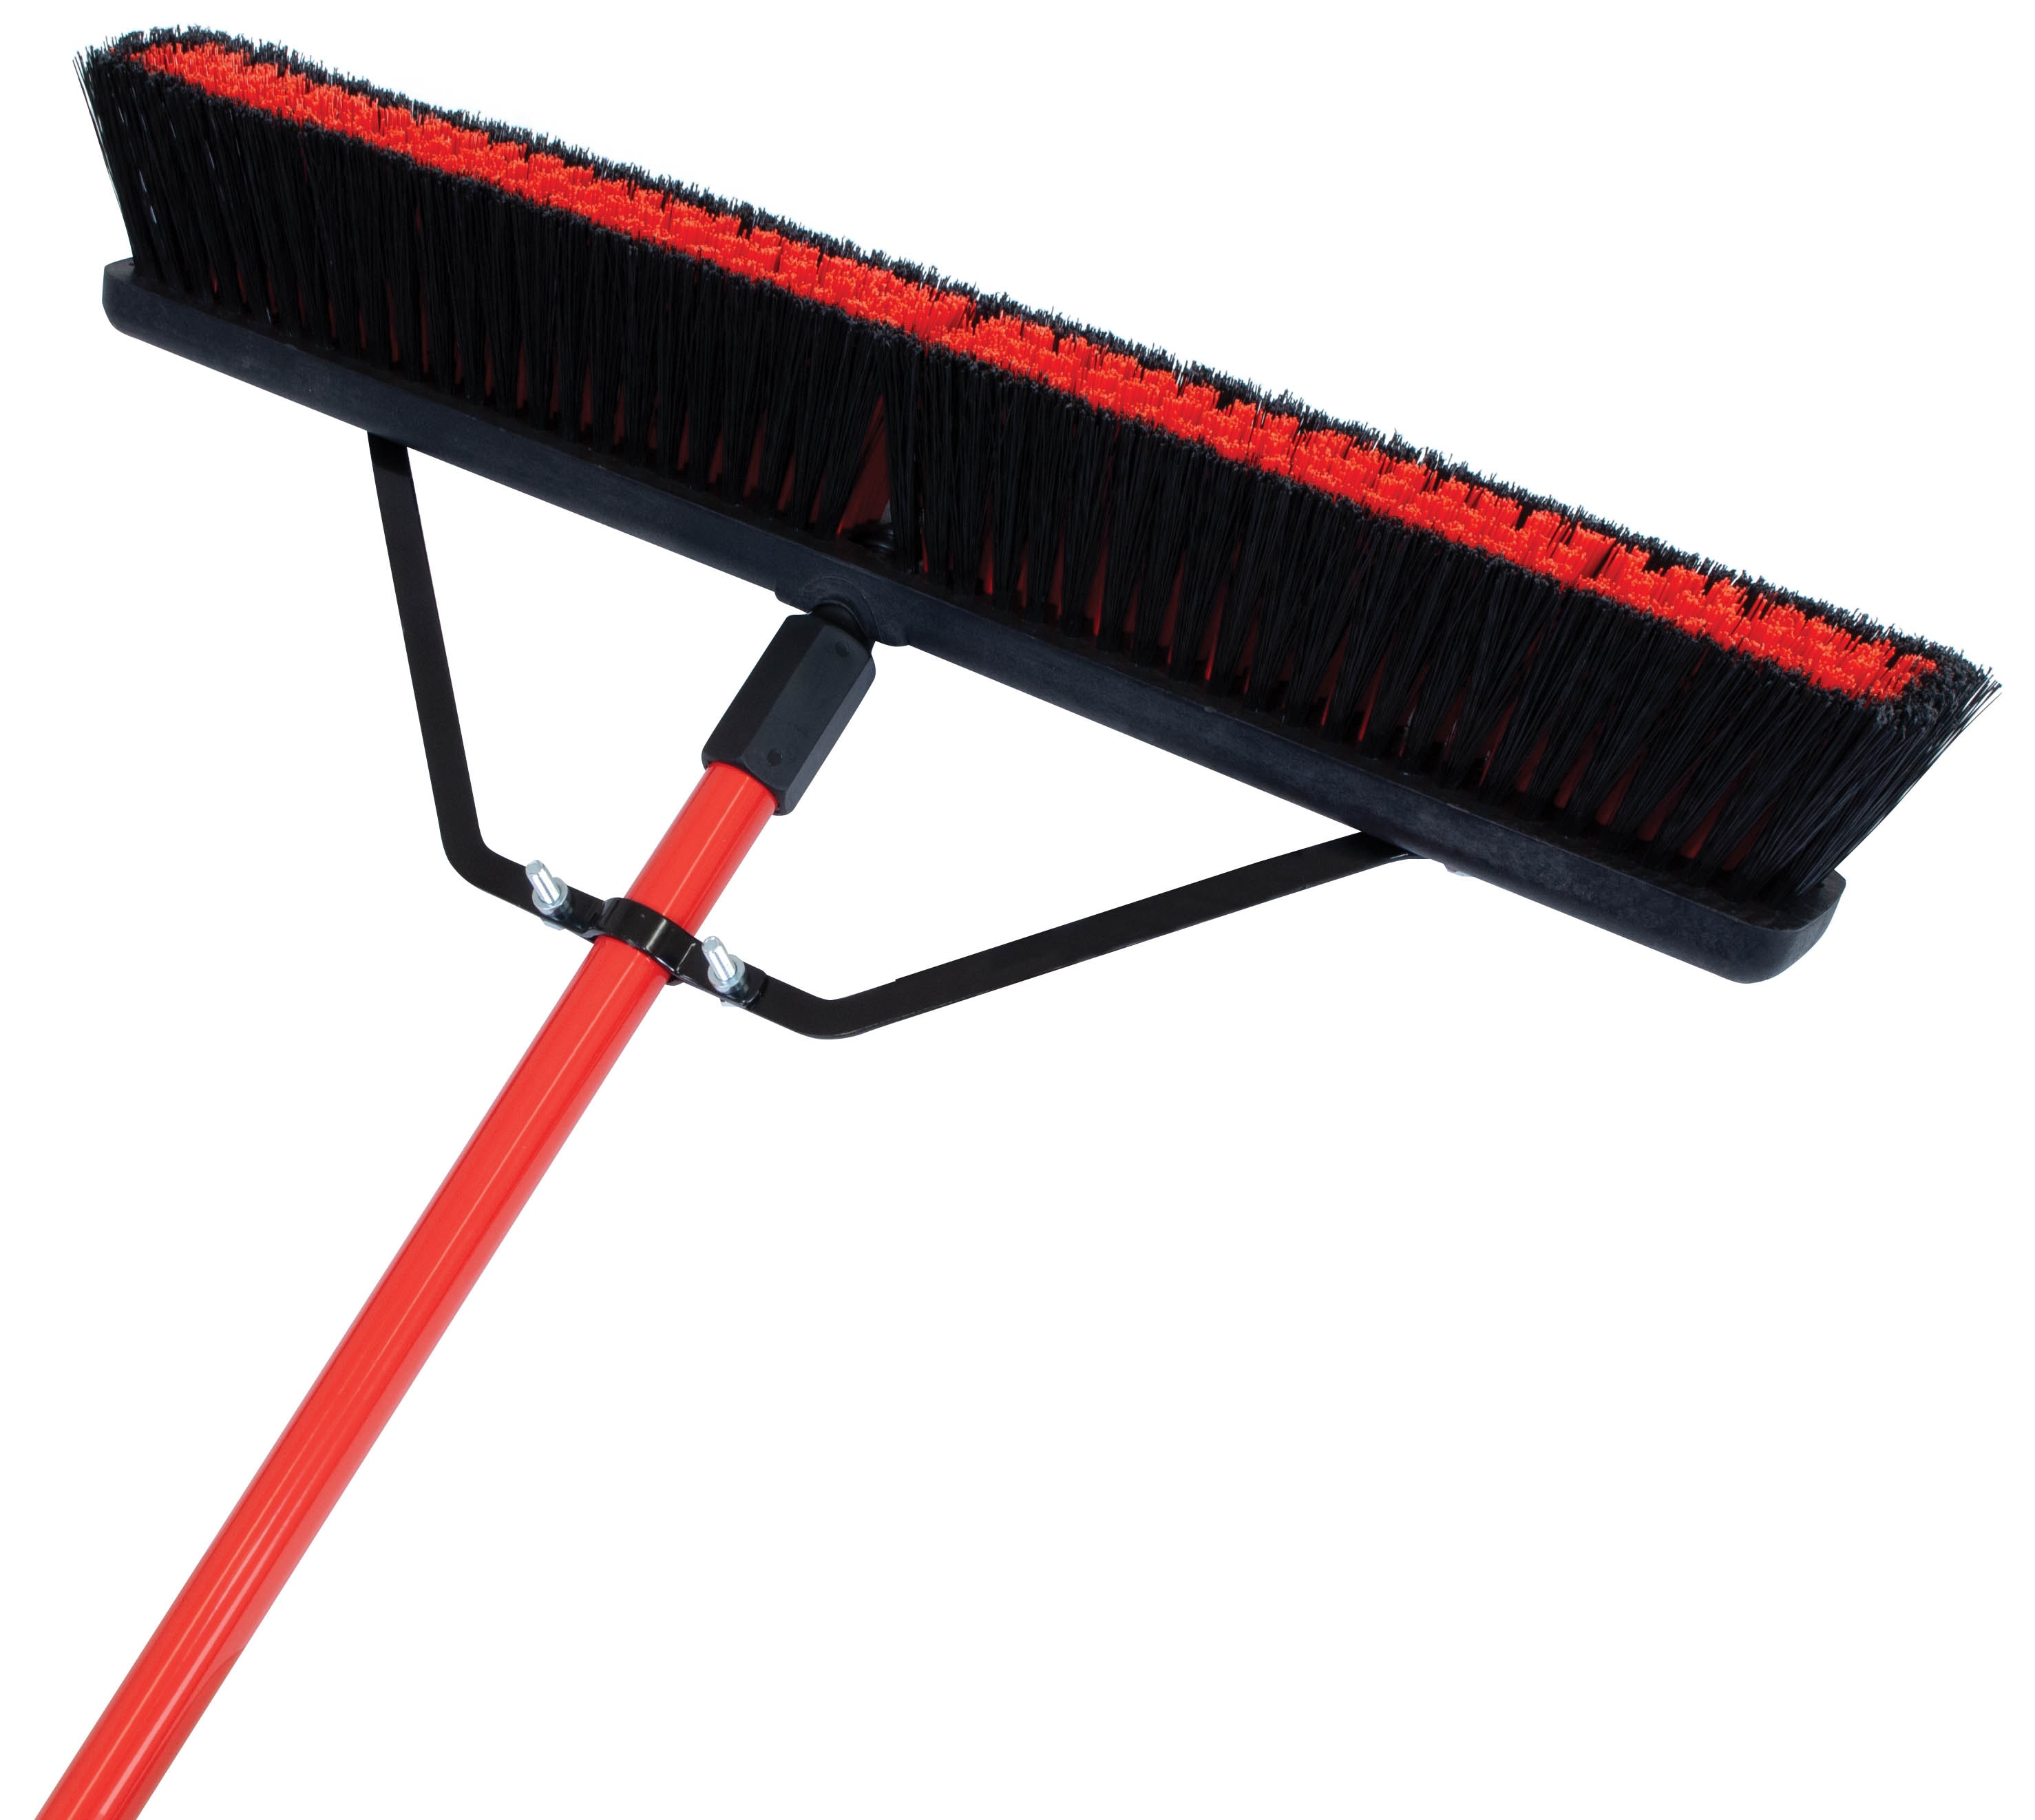 W Home 6640 Carpet Effective Cleaning Broom Brush